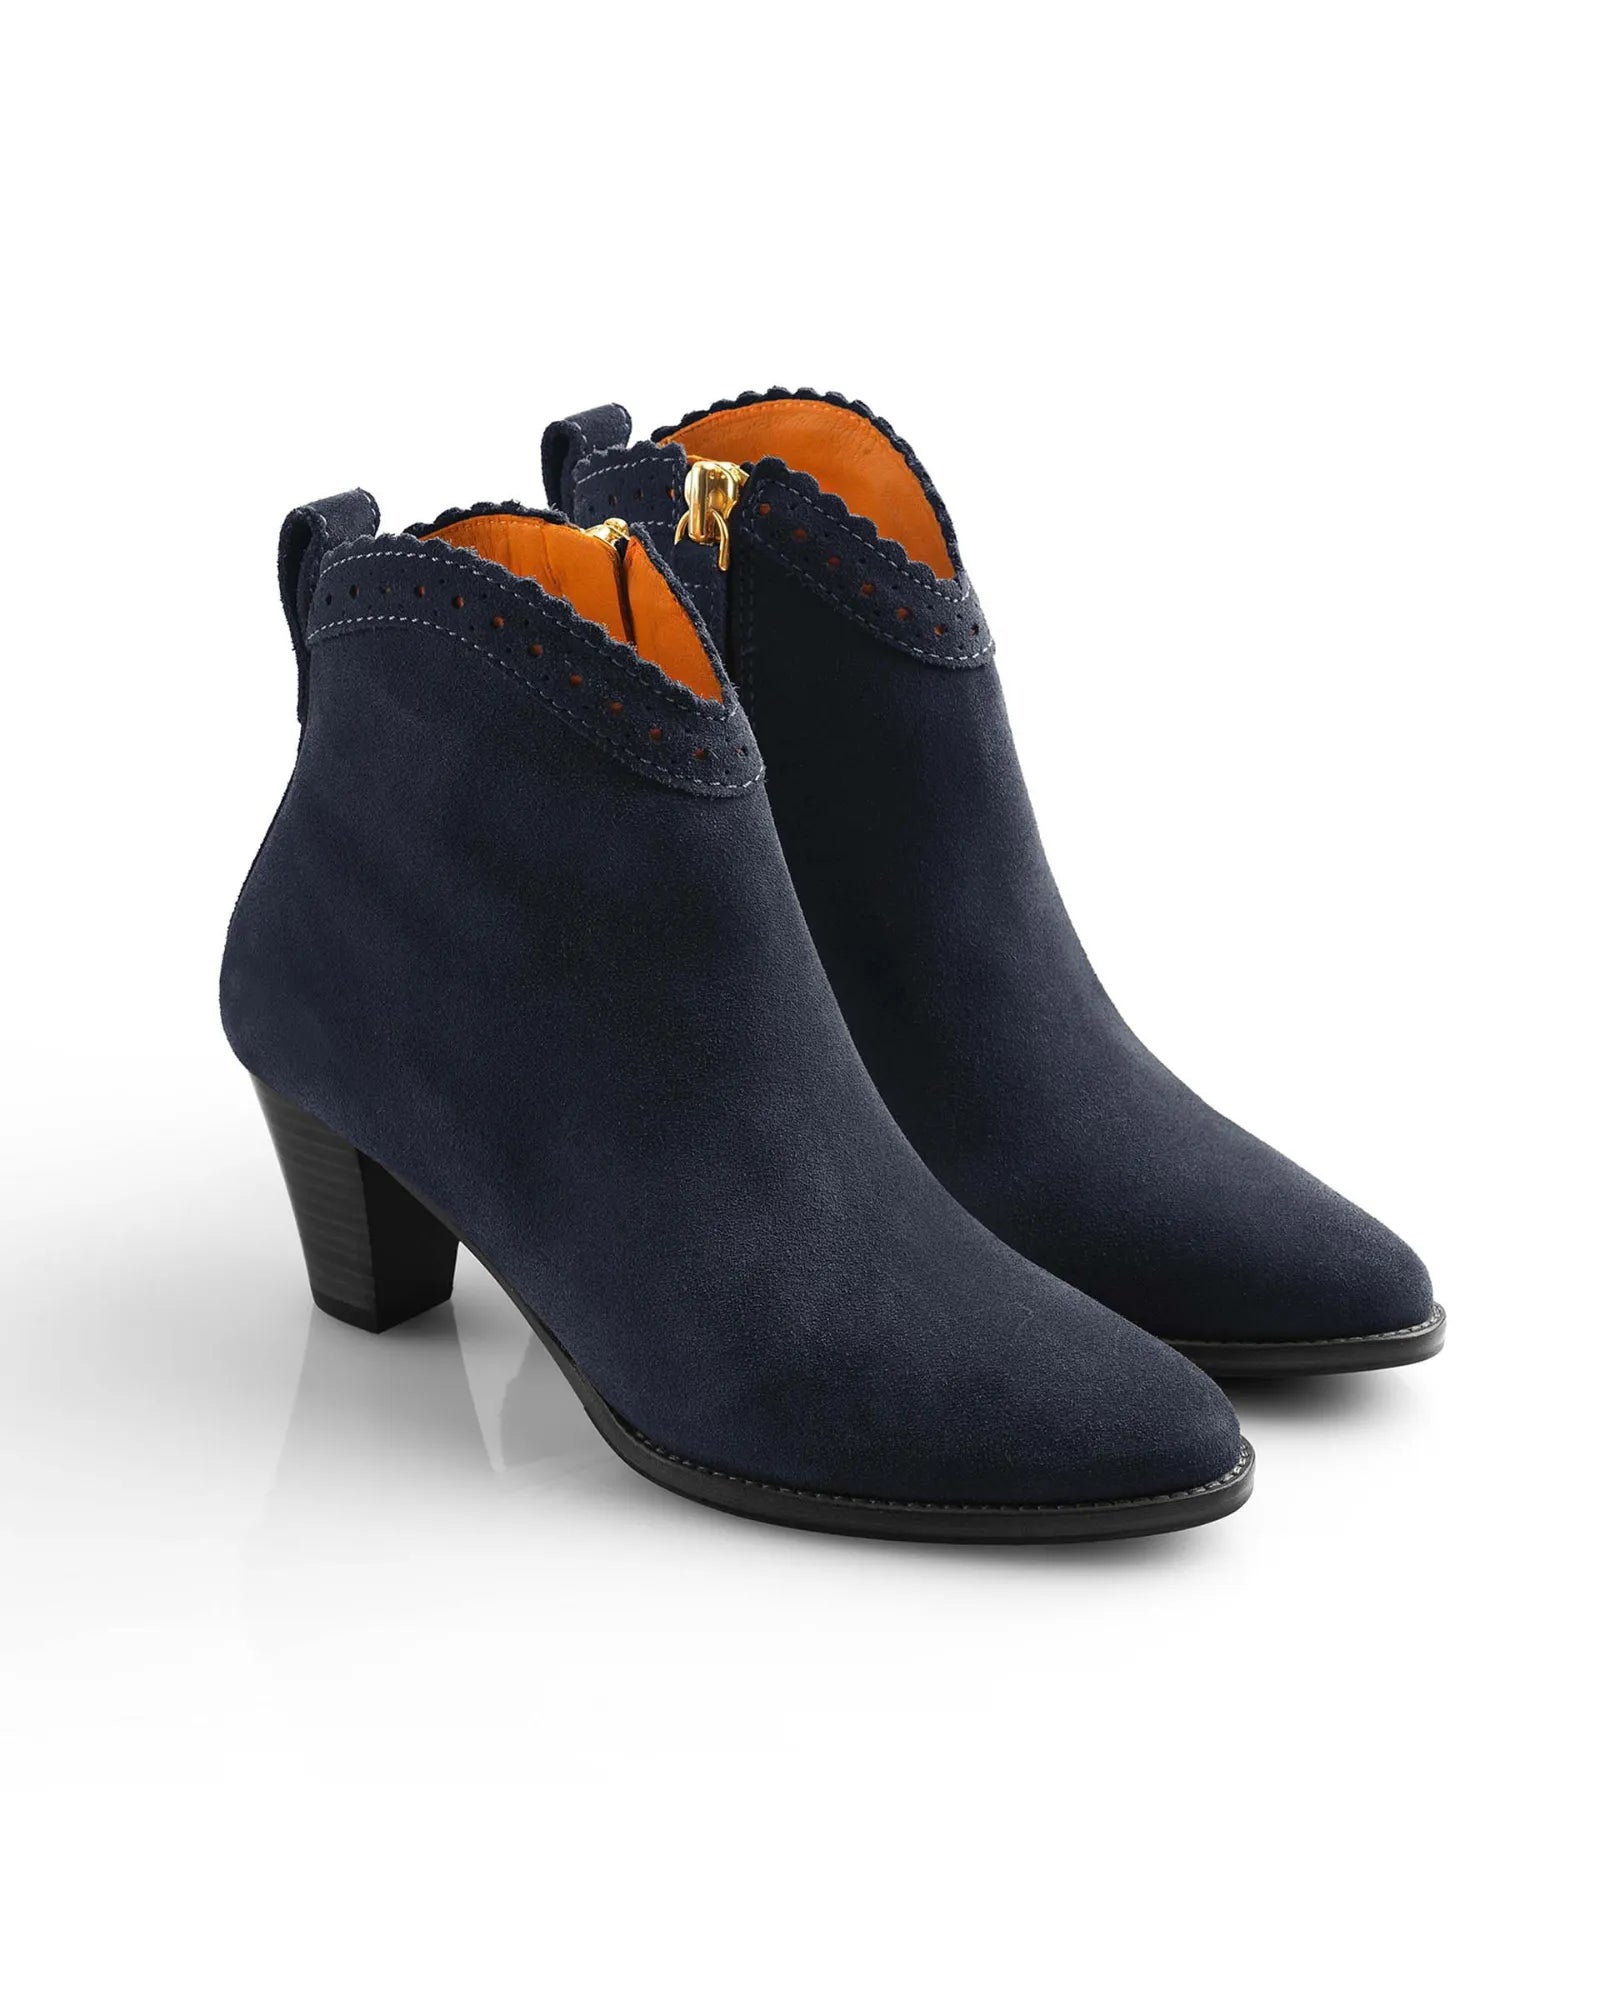 The Regina Ankle Boot in Navy Suede